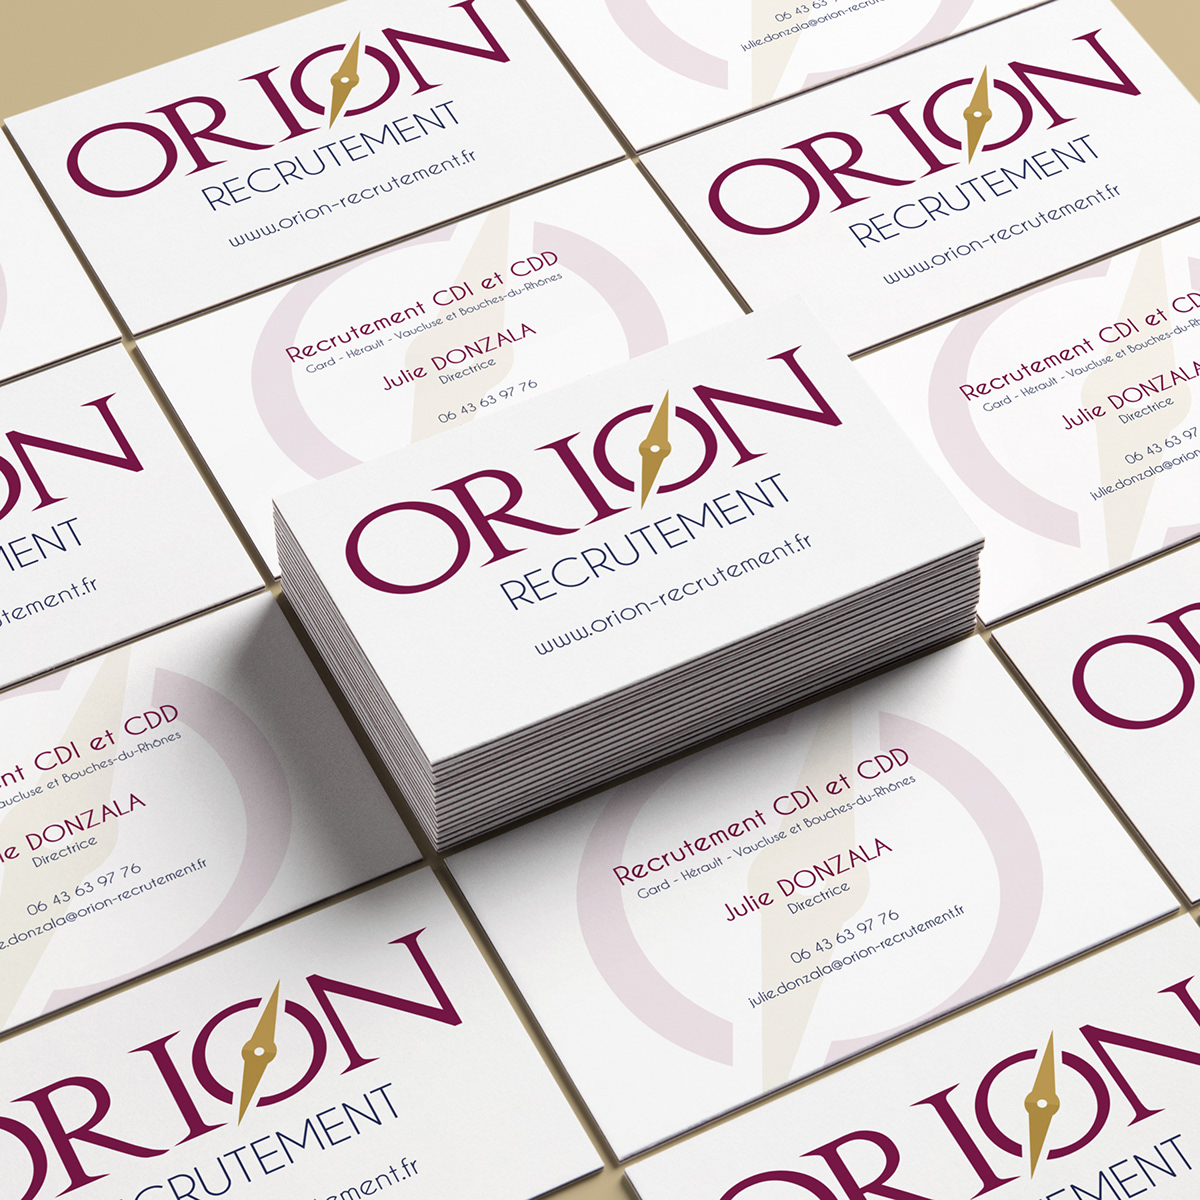 Business card for Orion Recrutement